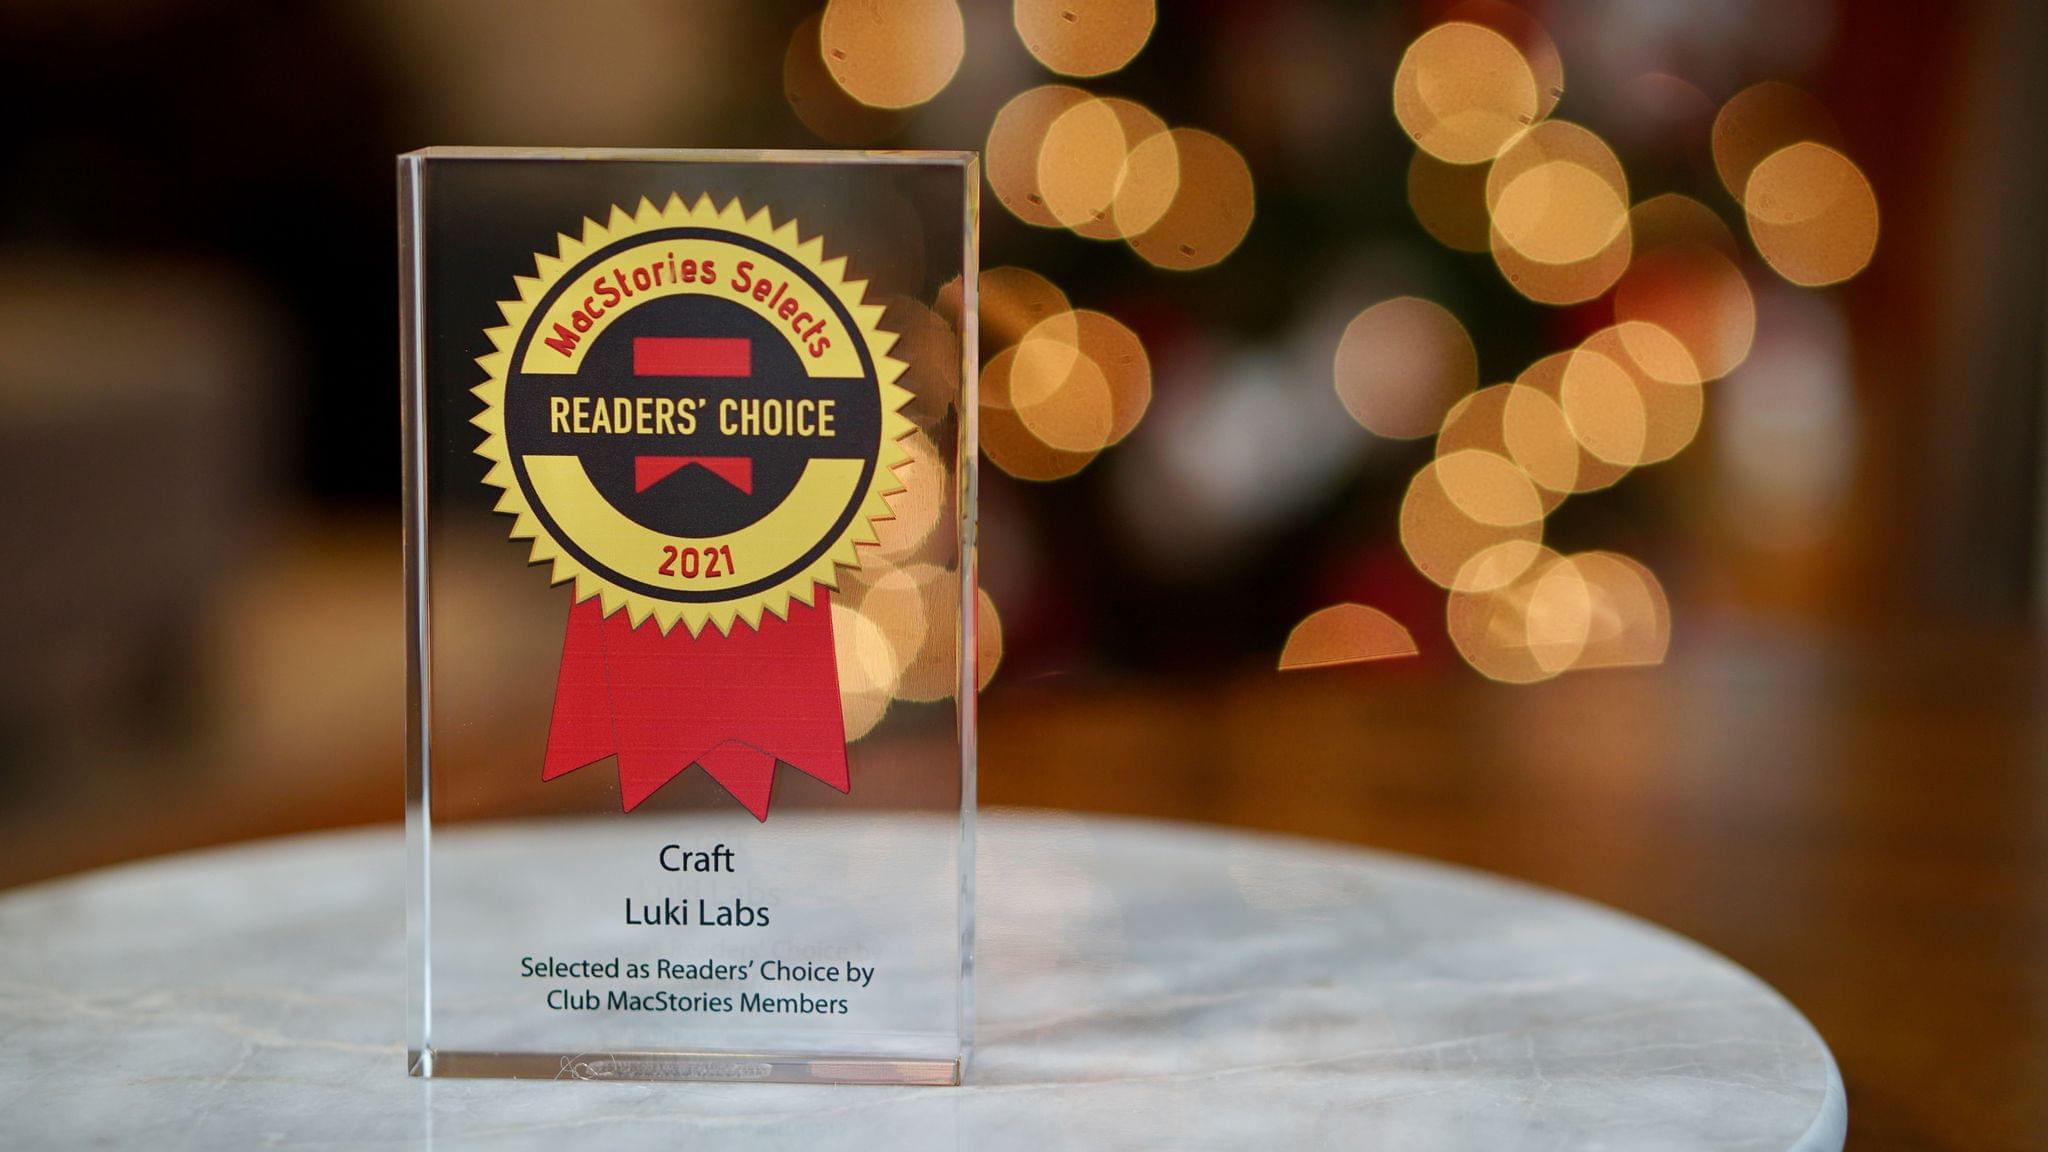 In 2021, Club MacStories members picked Craft for the Readers' Choice Award.